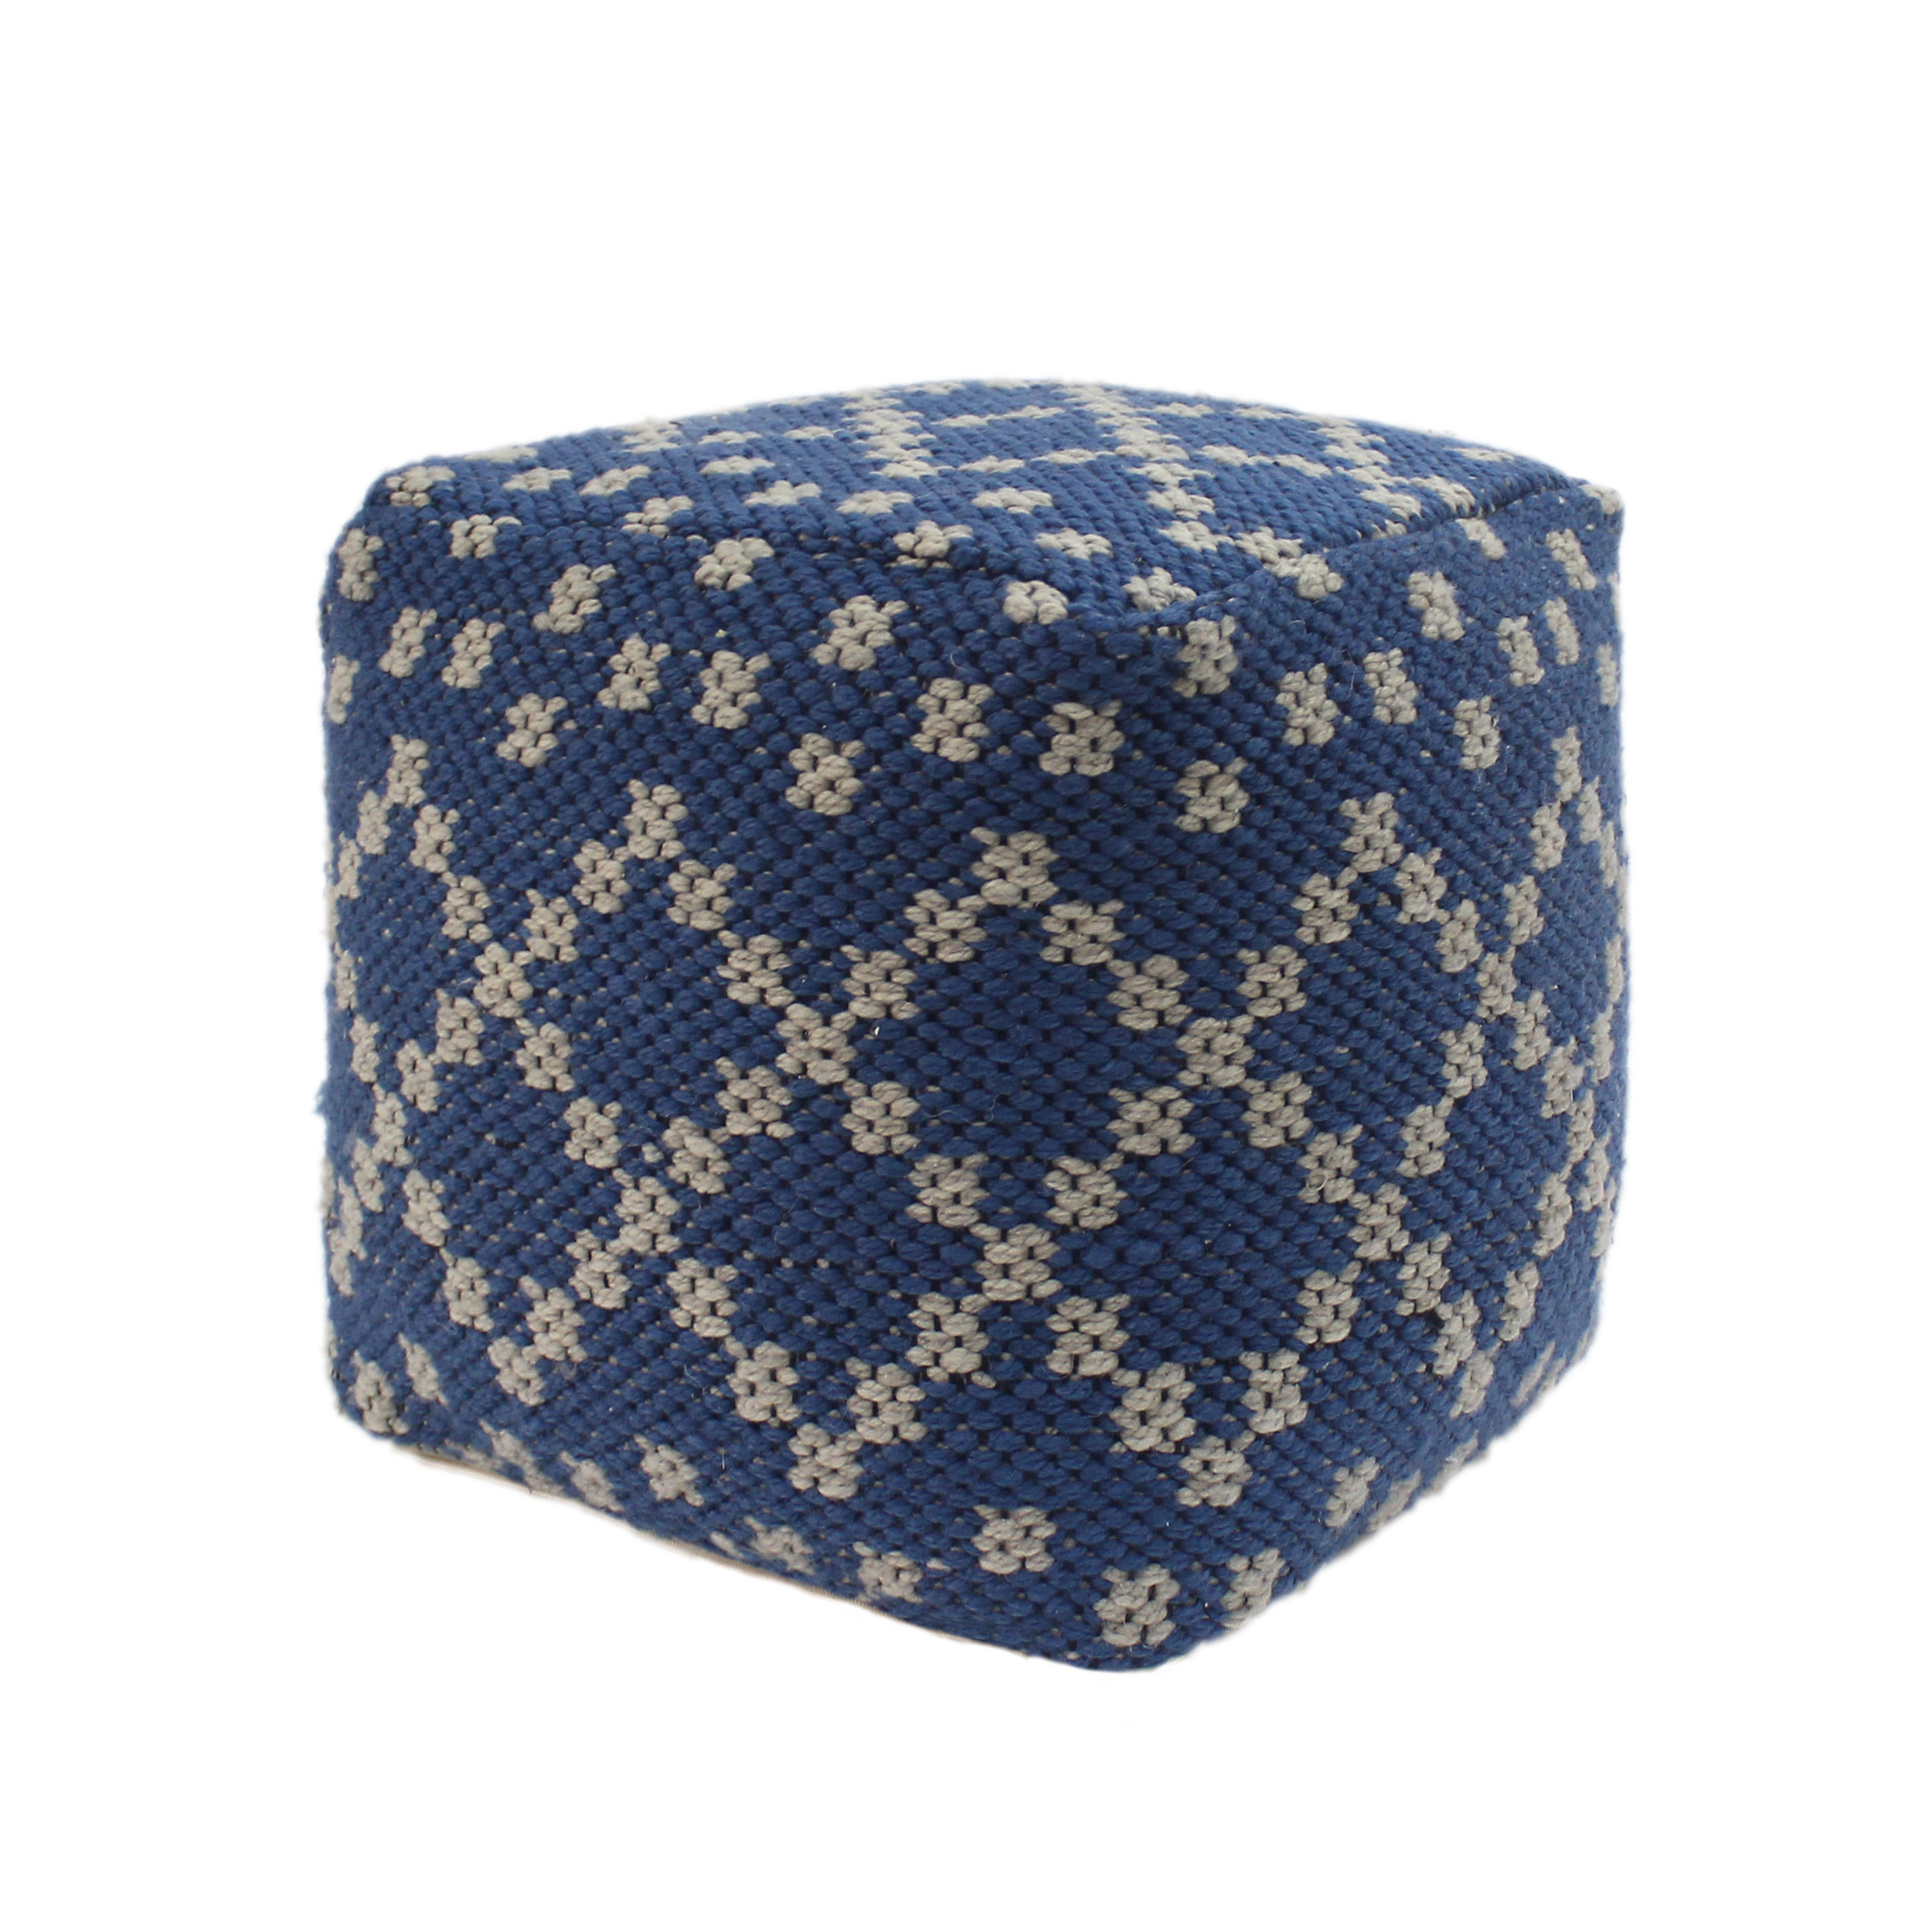 Ophelia Outdoor Handcrafted Boho Fabric Cube Pouf, Blue and White - image 3 of 6